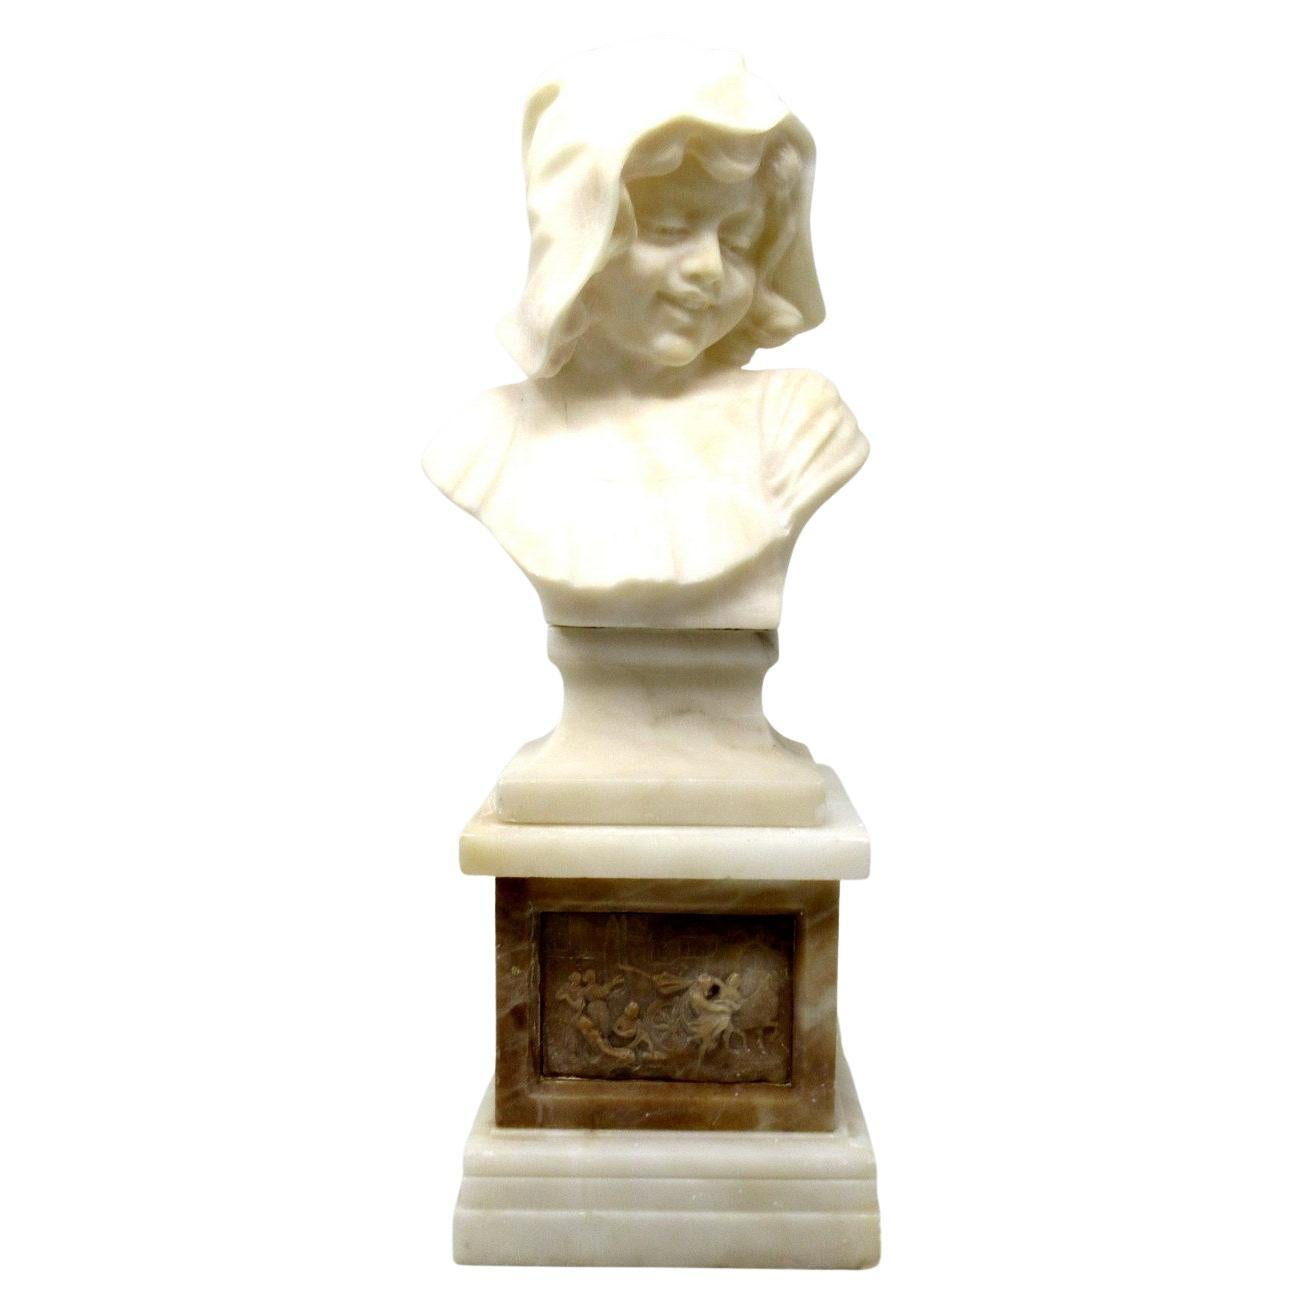 An exceptionally fine quality highly detailed carved Alabaster portrait figure sculpture bust of an elegant lady wearing a bonnet. Last quarter of the Nineteenth century, possibly of French or Italian origin. 

The bust is supported on a square